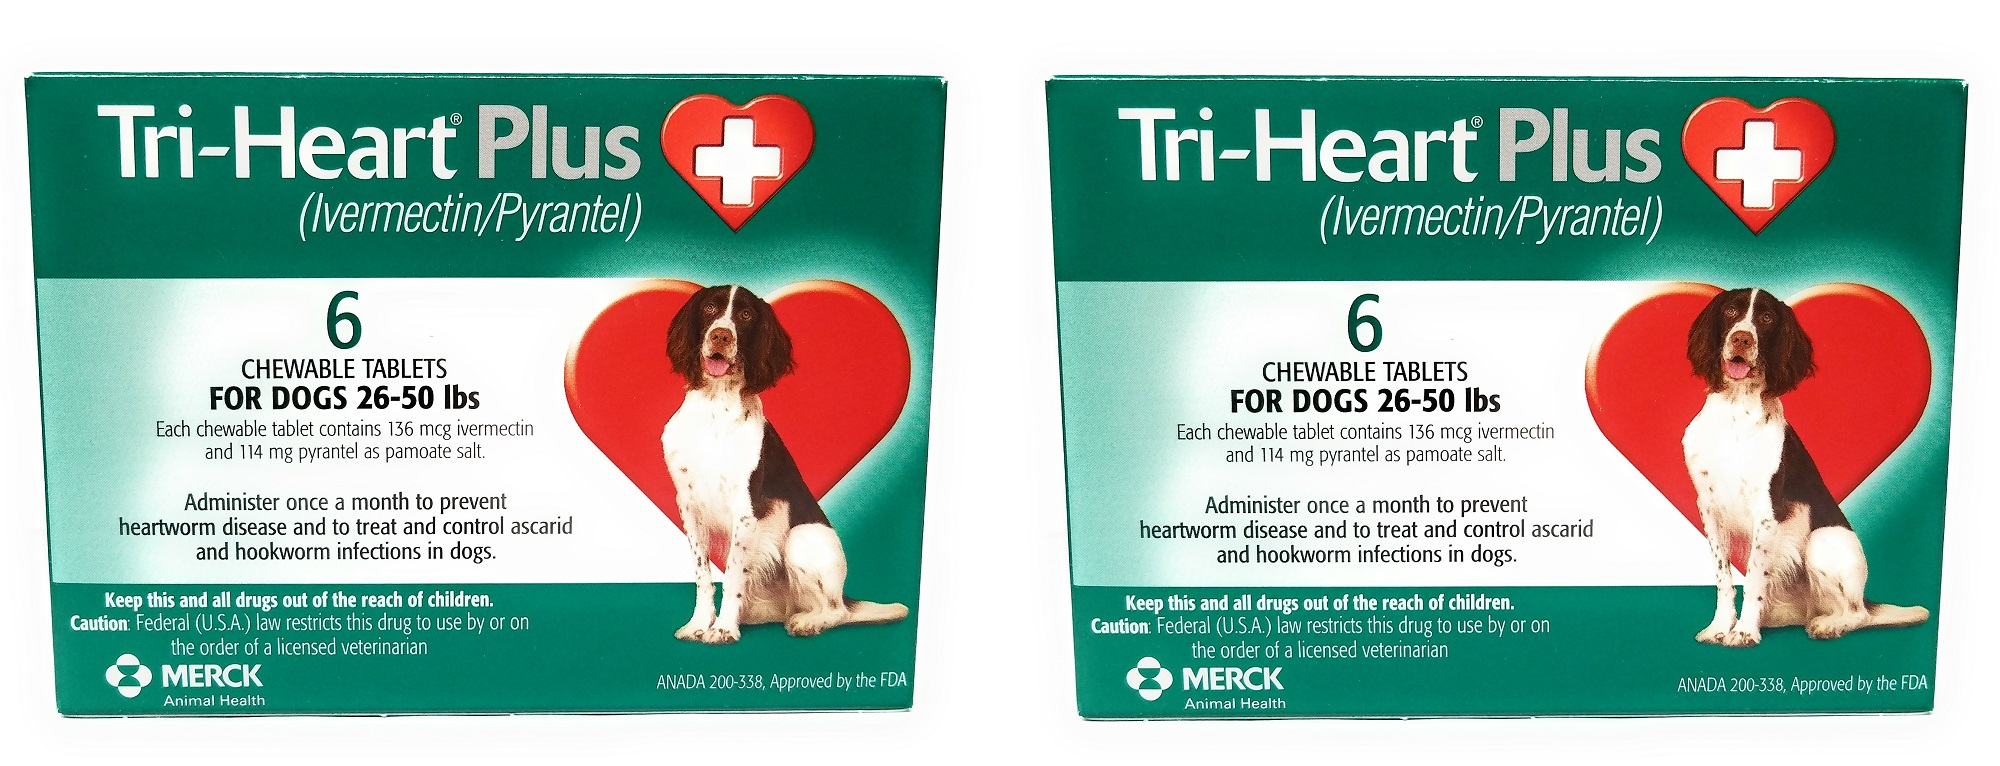 vet-approved-rx-tri-heart-plus-chew-tabs-26-50-lbs-green-12-doses-for